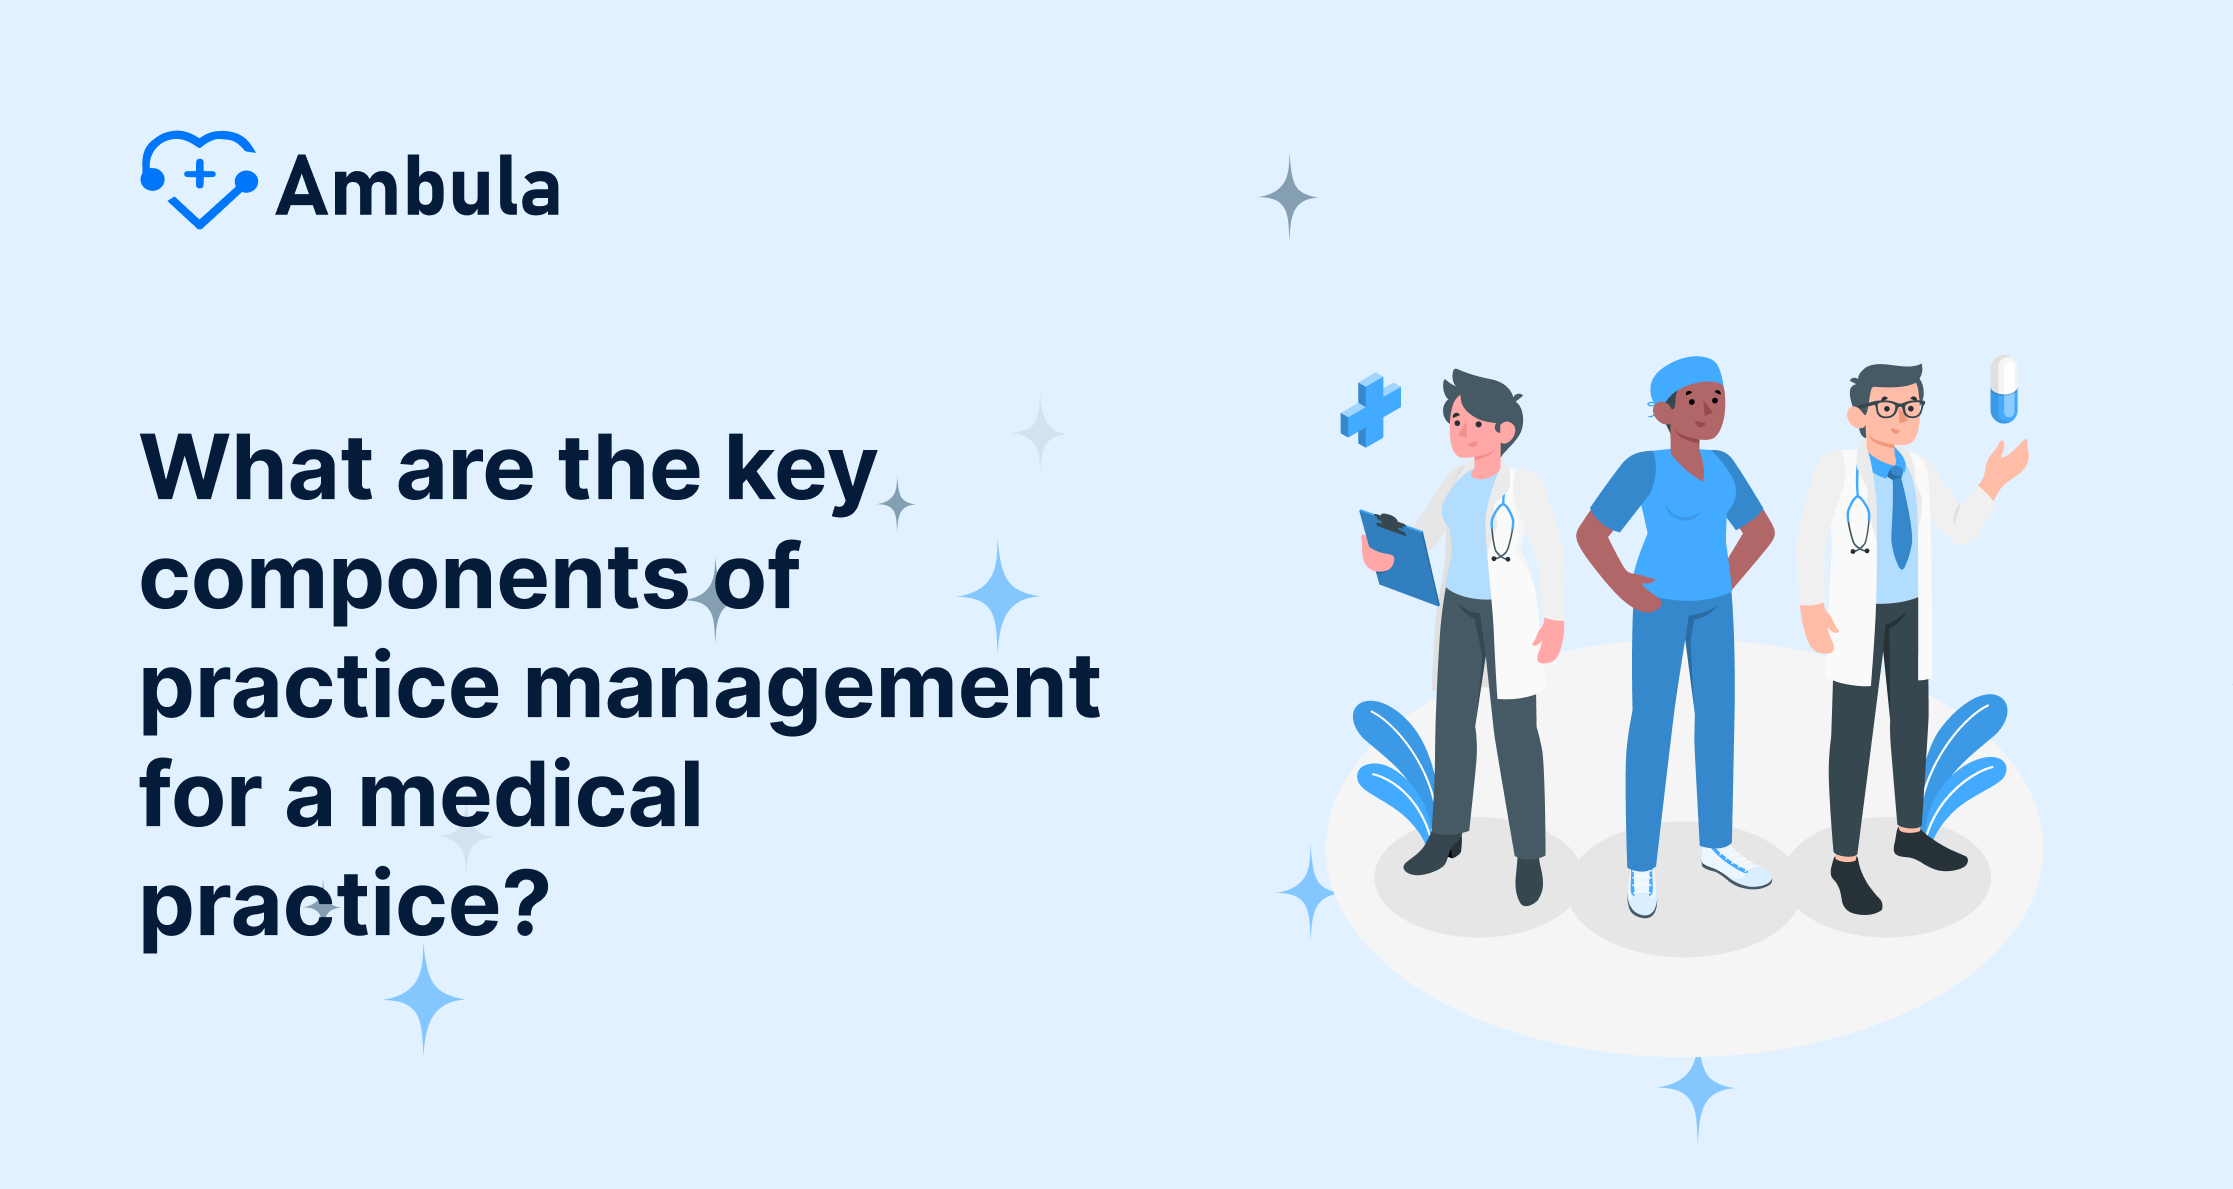 What are the key components of practice management for a medical practice?